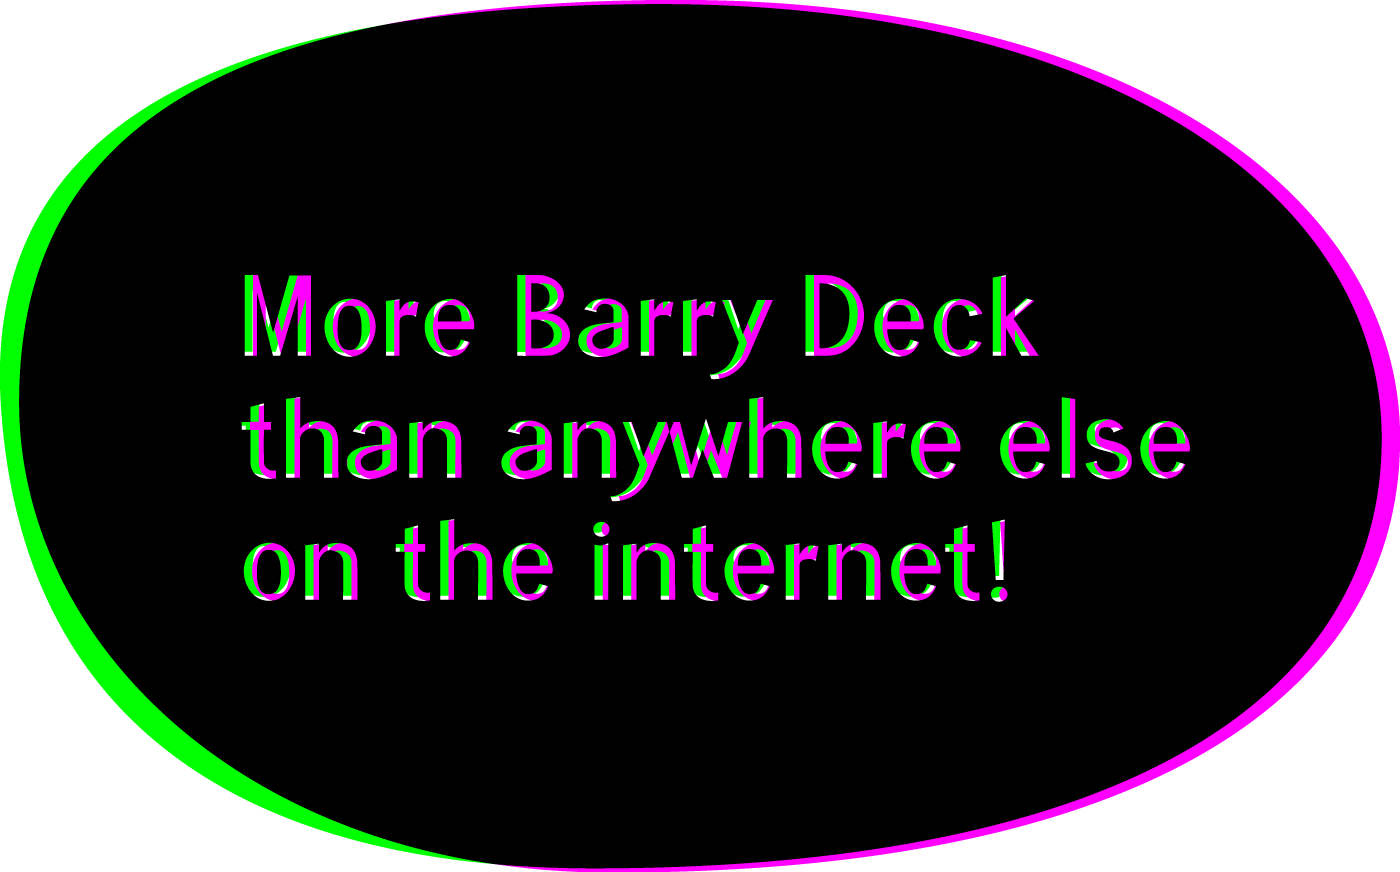 More Barry Deck than anywhere else on the internet!